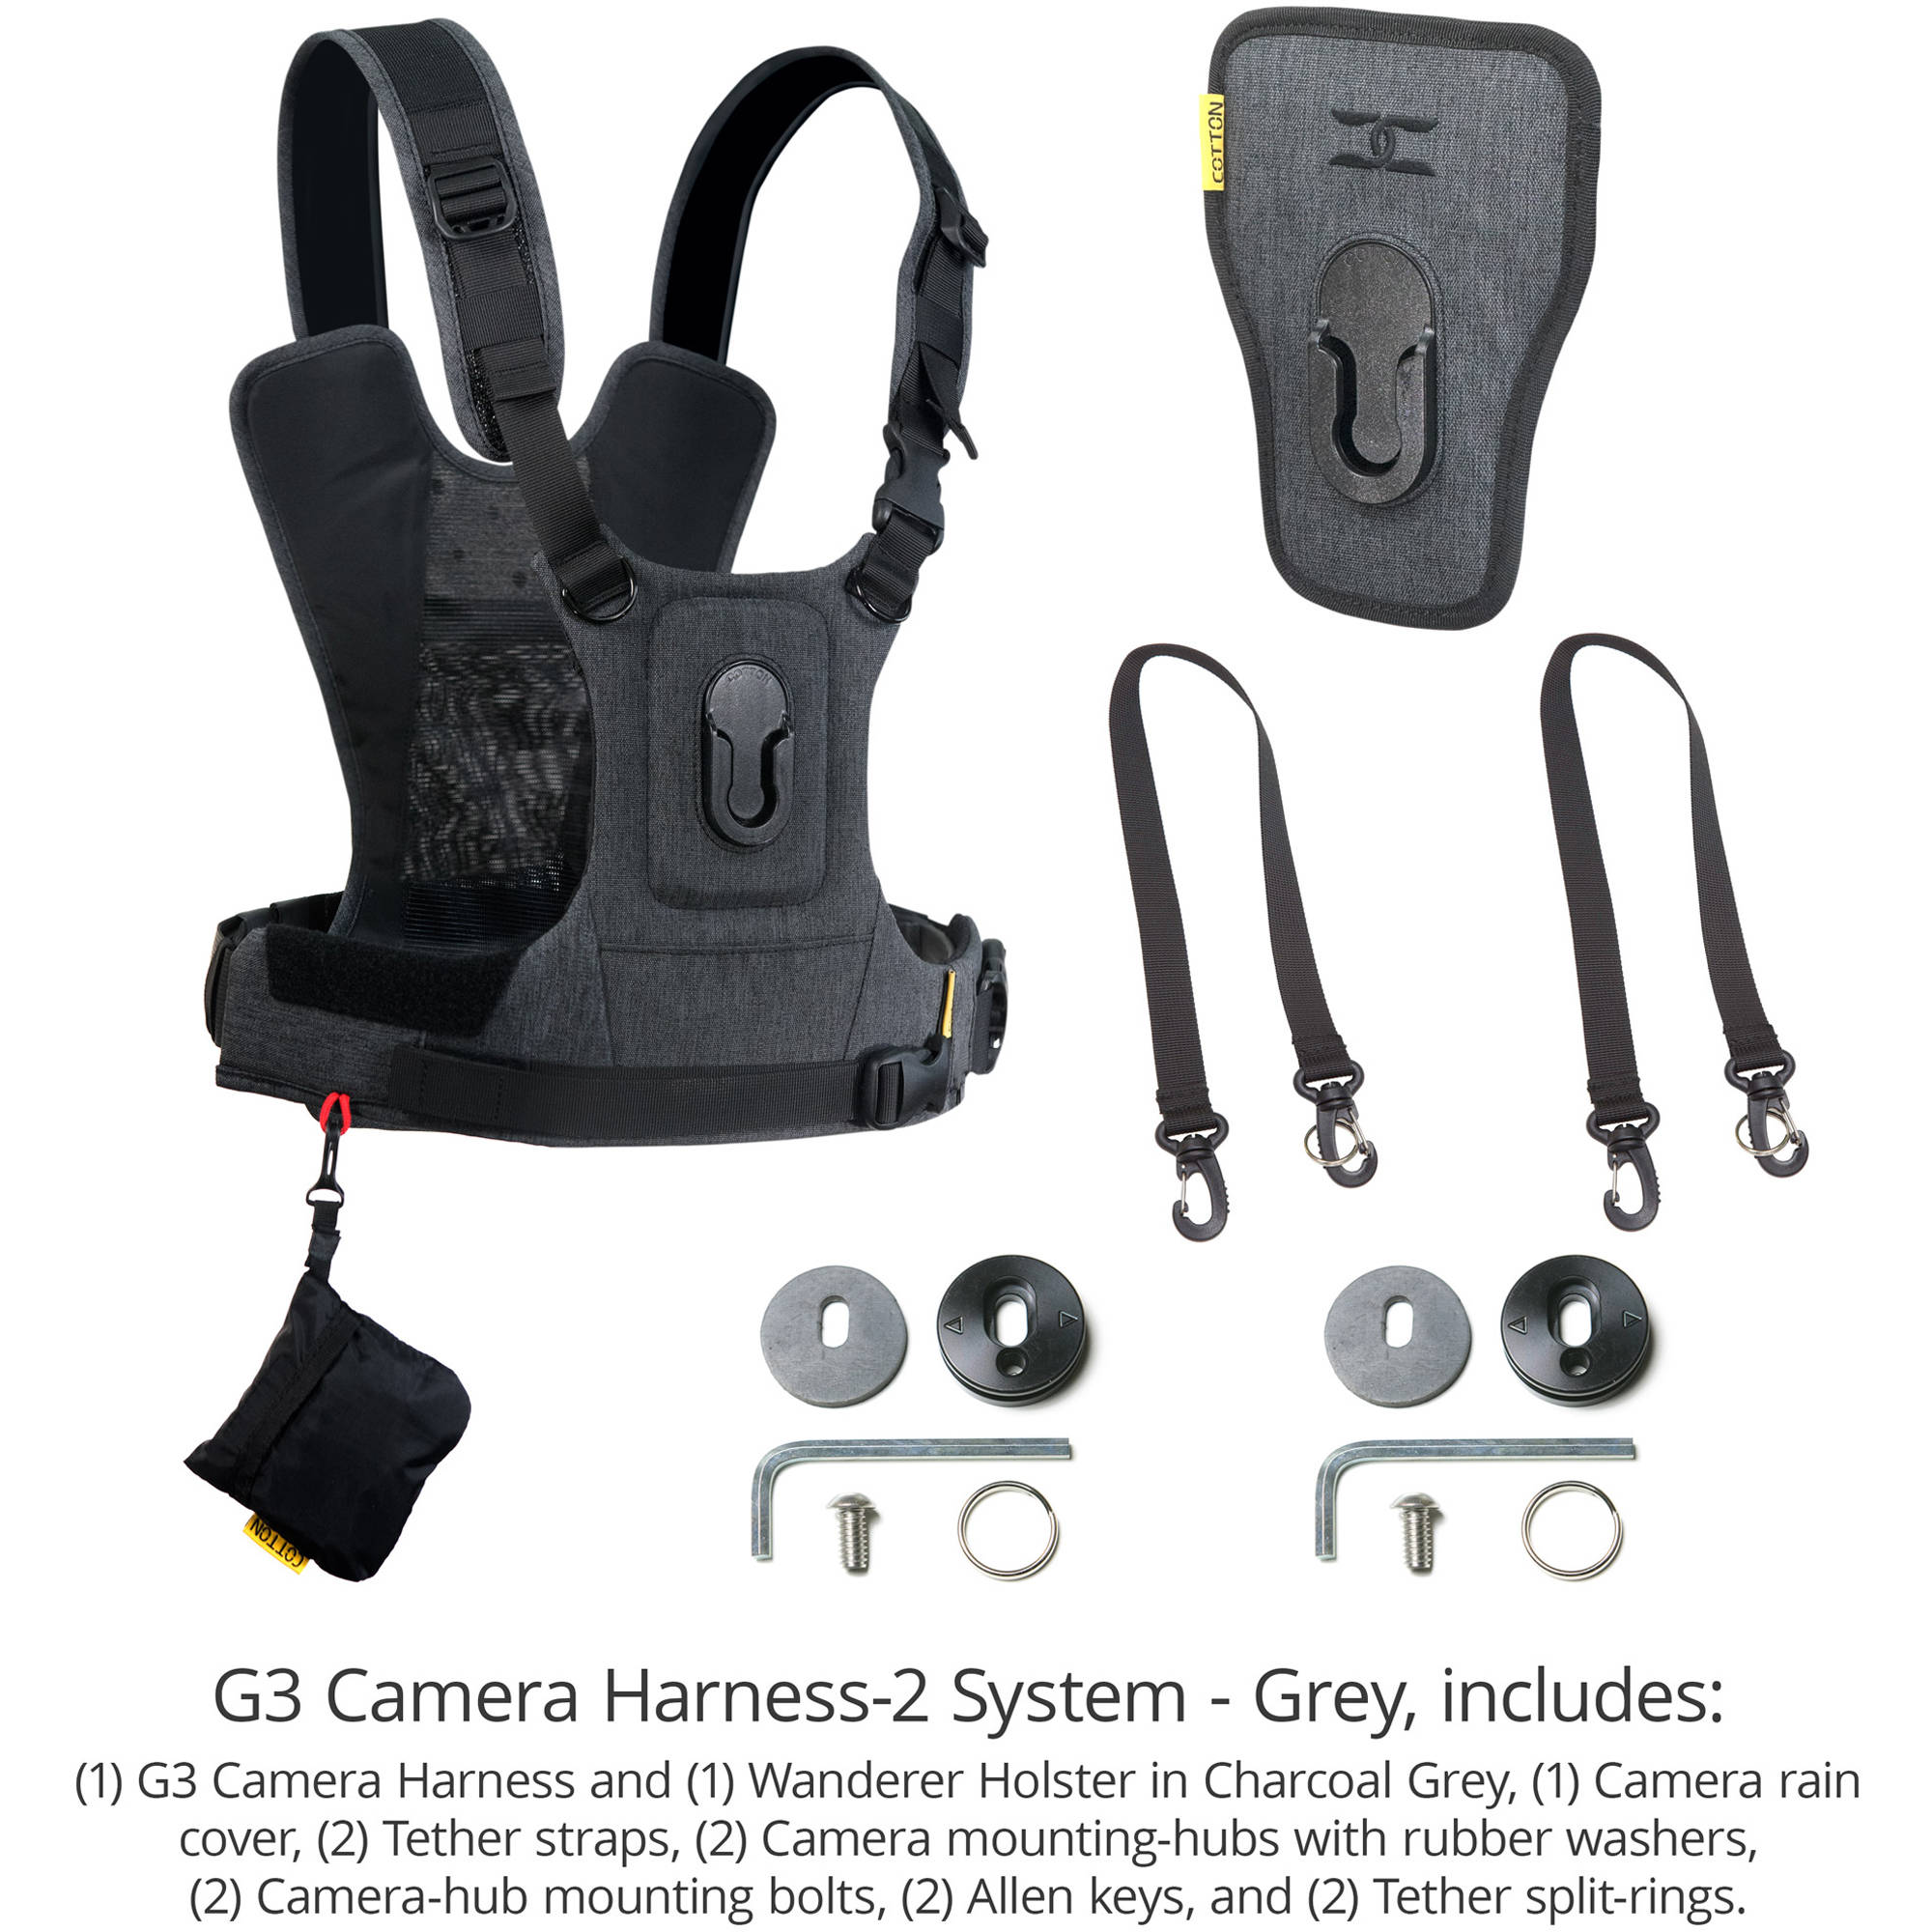 Cotton Carrier CCS G3 Harness-2 - Gray